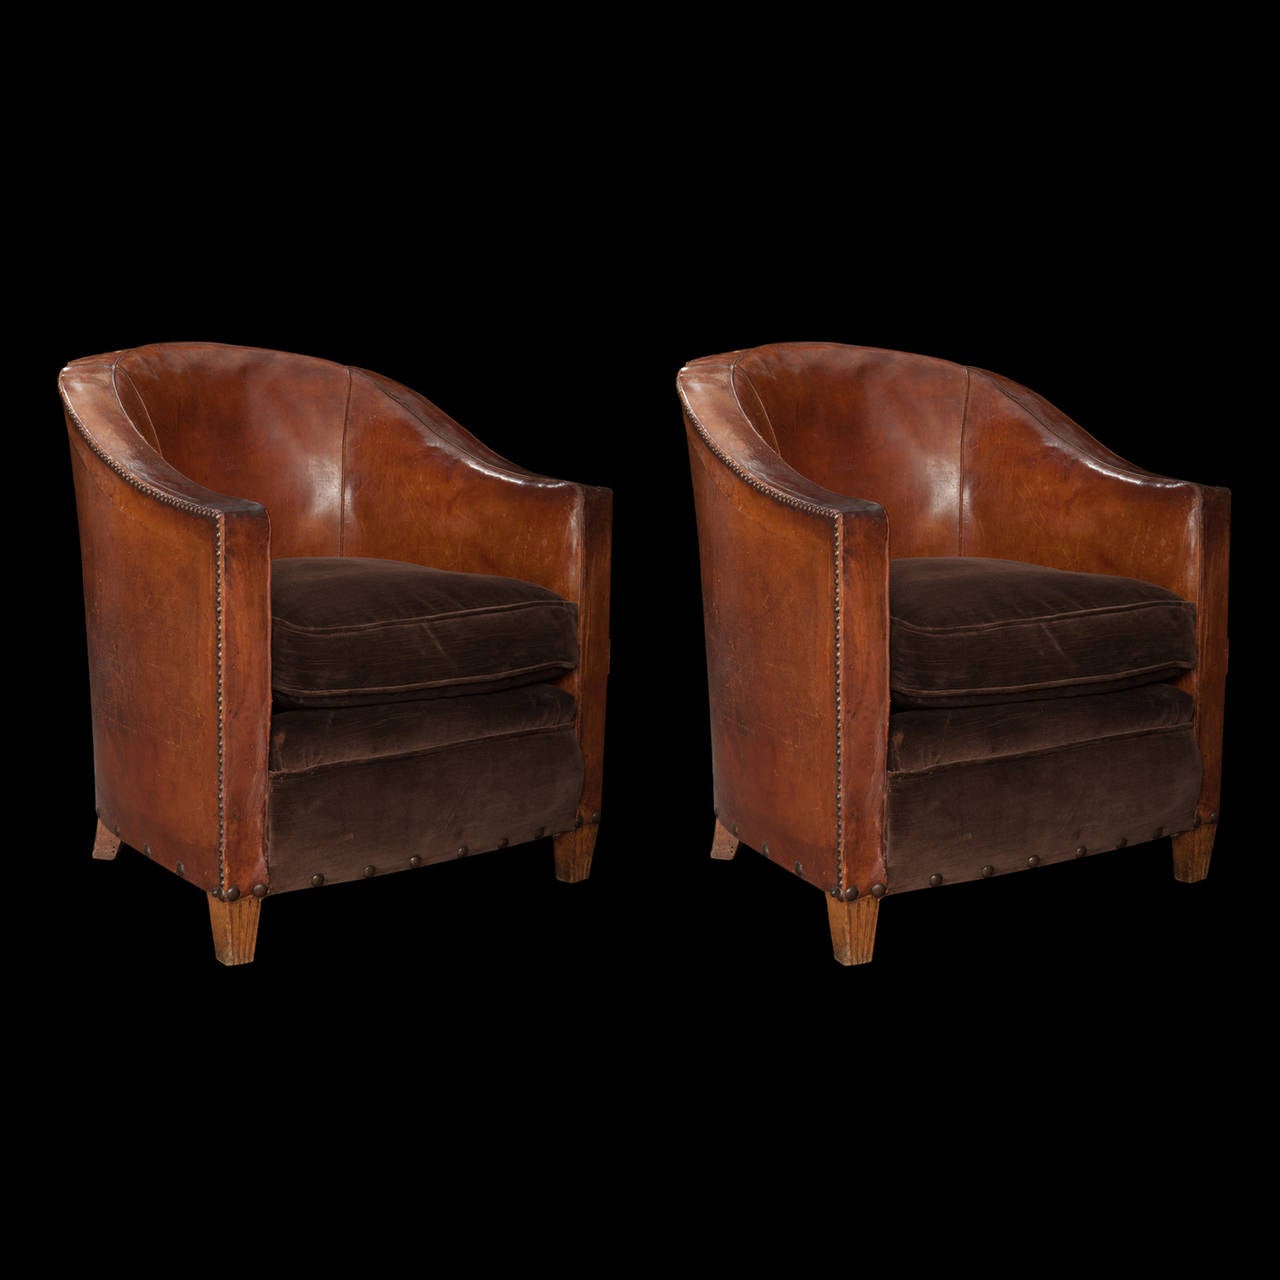 Elegant form with original leather upholstery, brown velvet seat and apron.